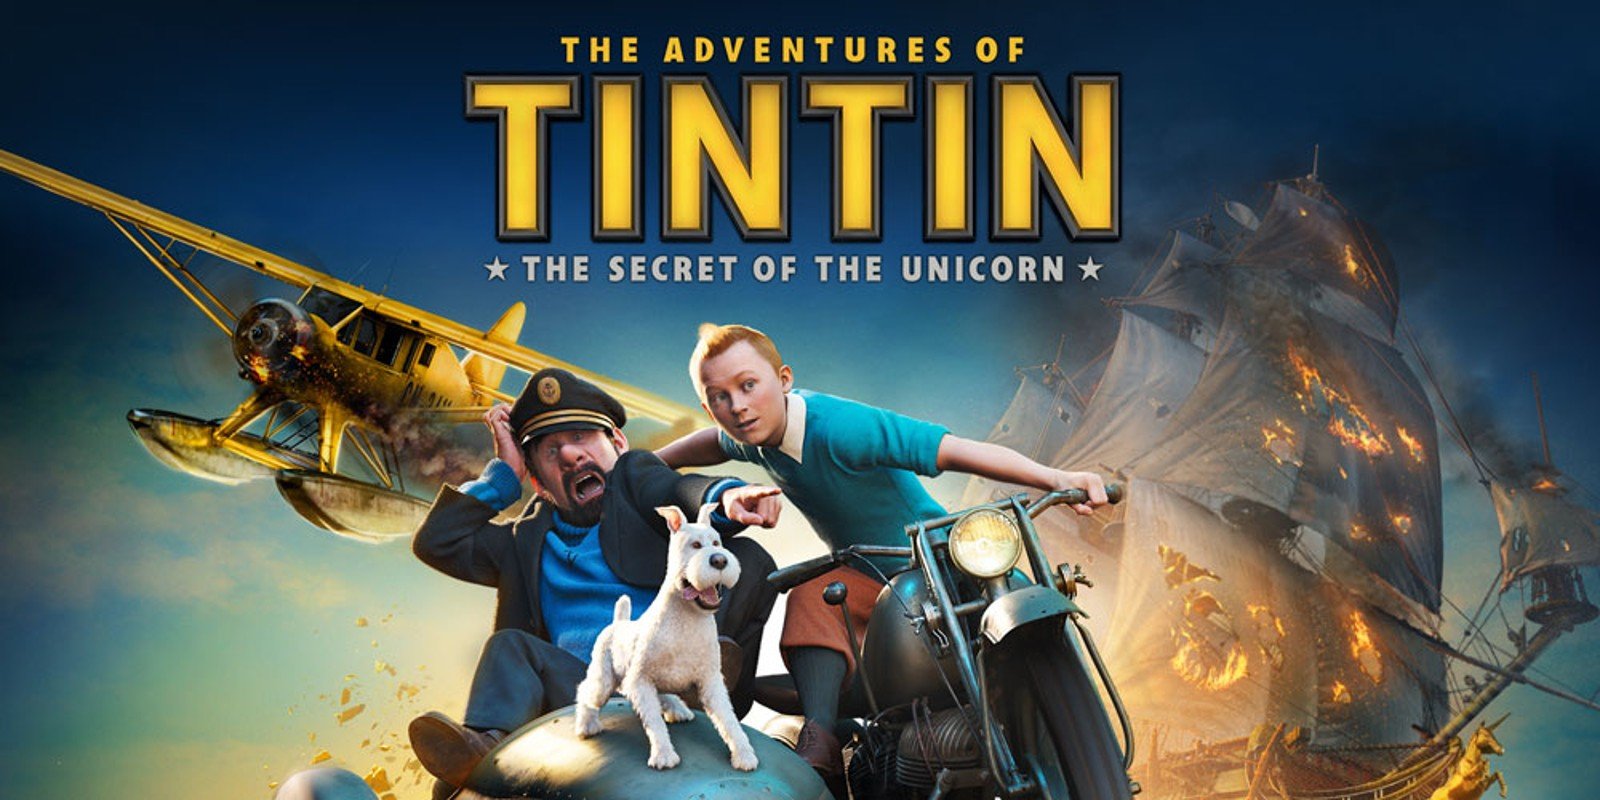 The Adventures Of Tintin: The Secret Of The Unicorn Poster